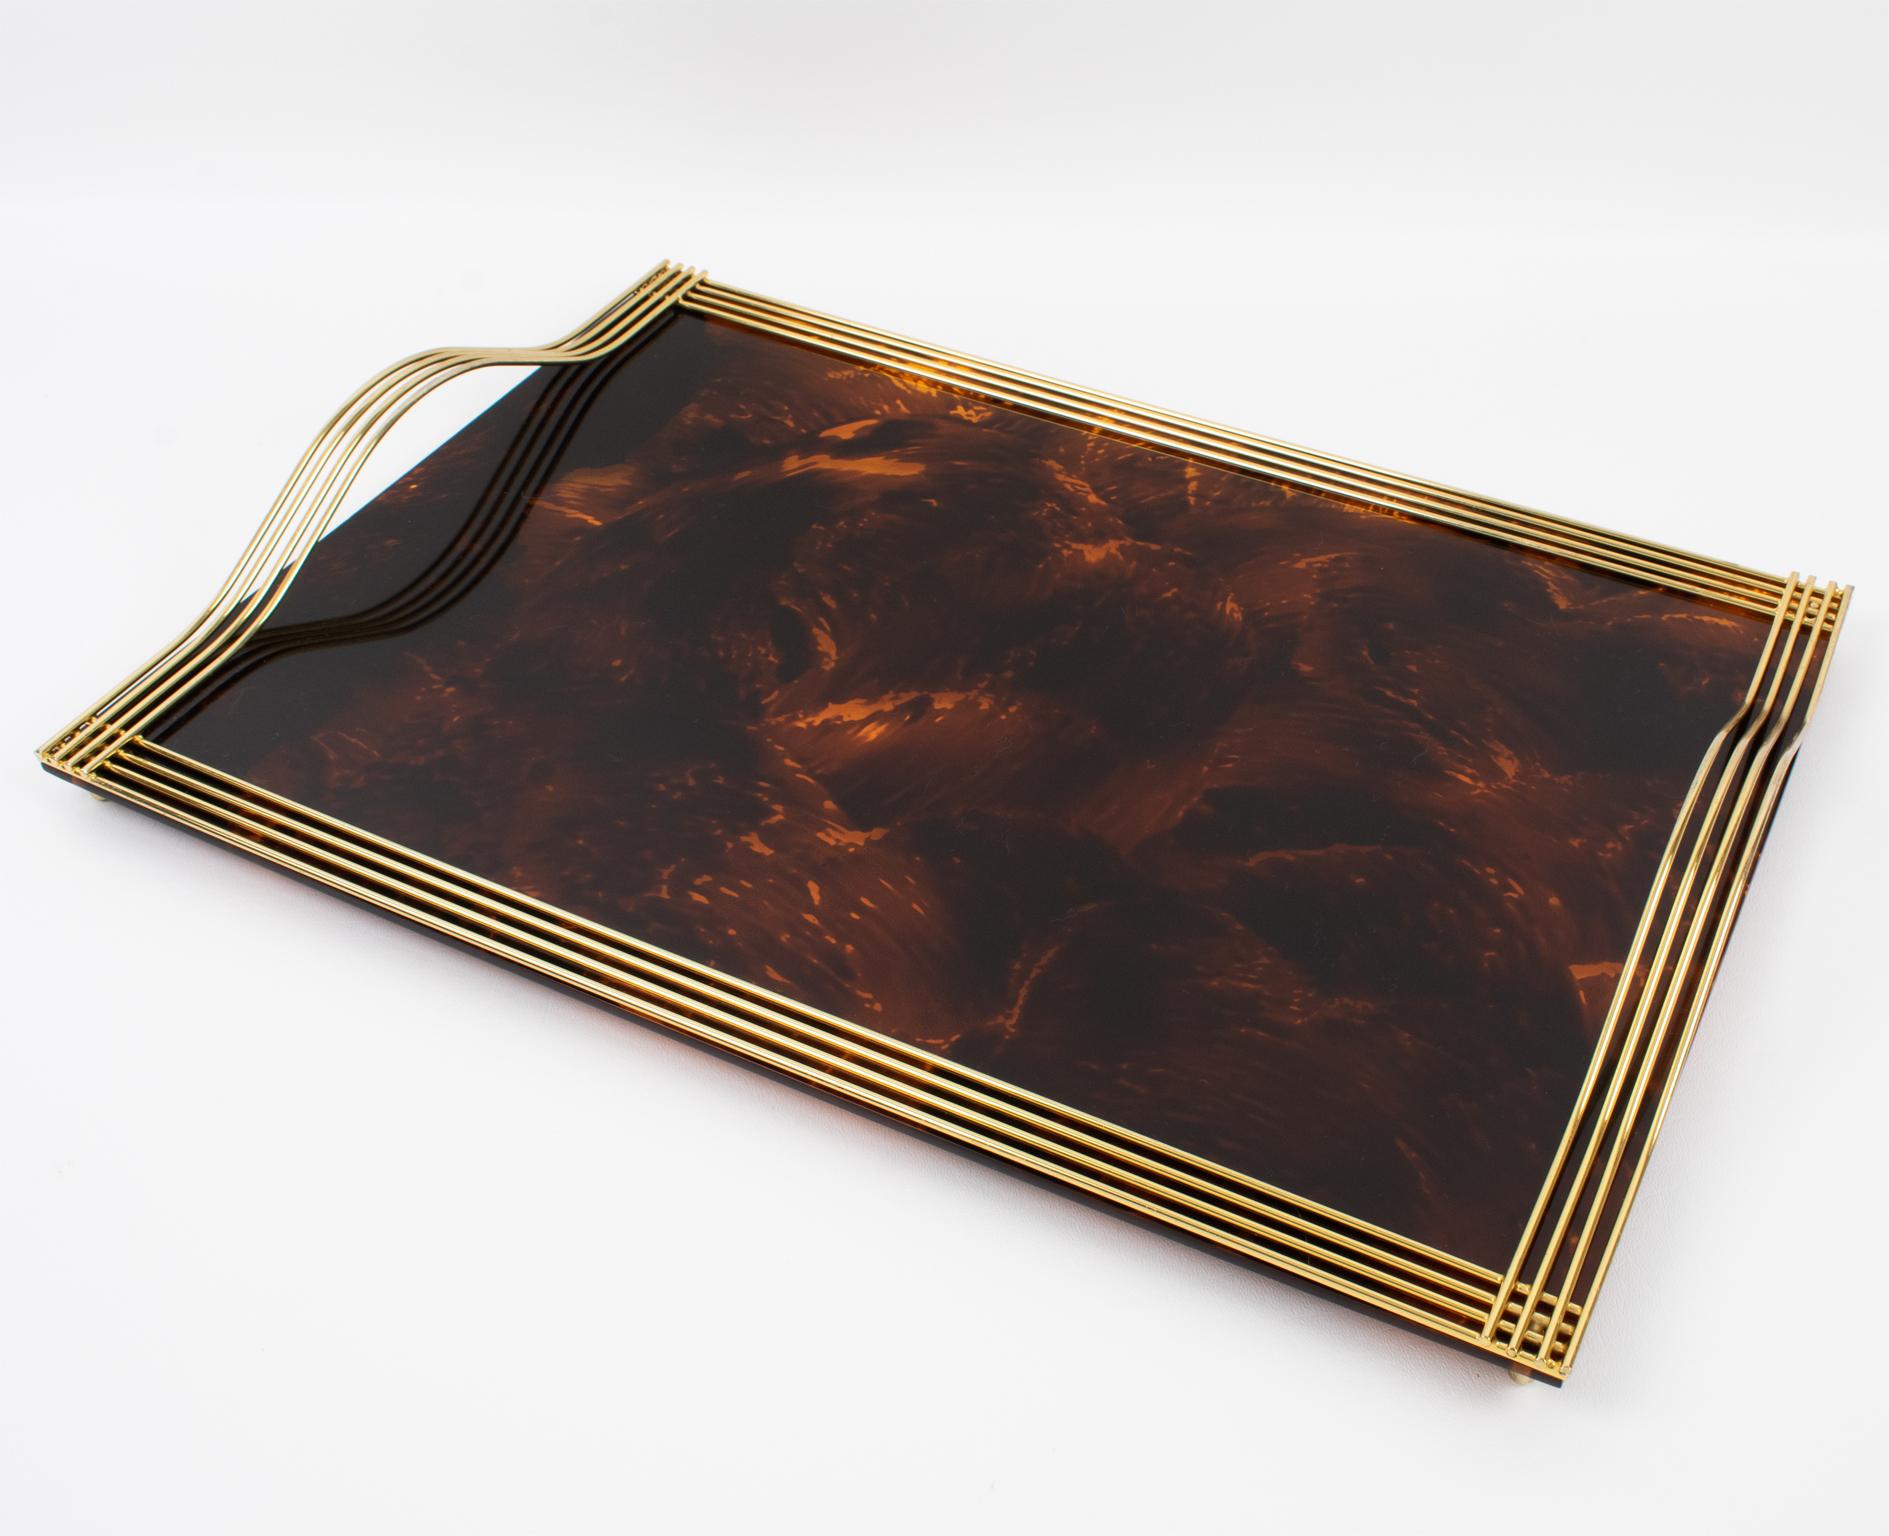 This elegant Mid-Century Modern barware serving tray was crafted in Italy in the 1970s. Its design is attributed to Willy Rizzo. The large rectangular butler shape has a gilded brass raised gallery and handles and a Lucite base in a tortoiseshell